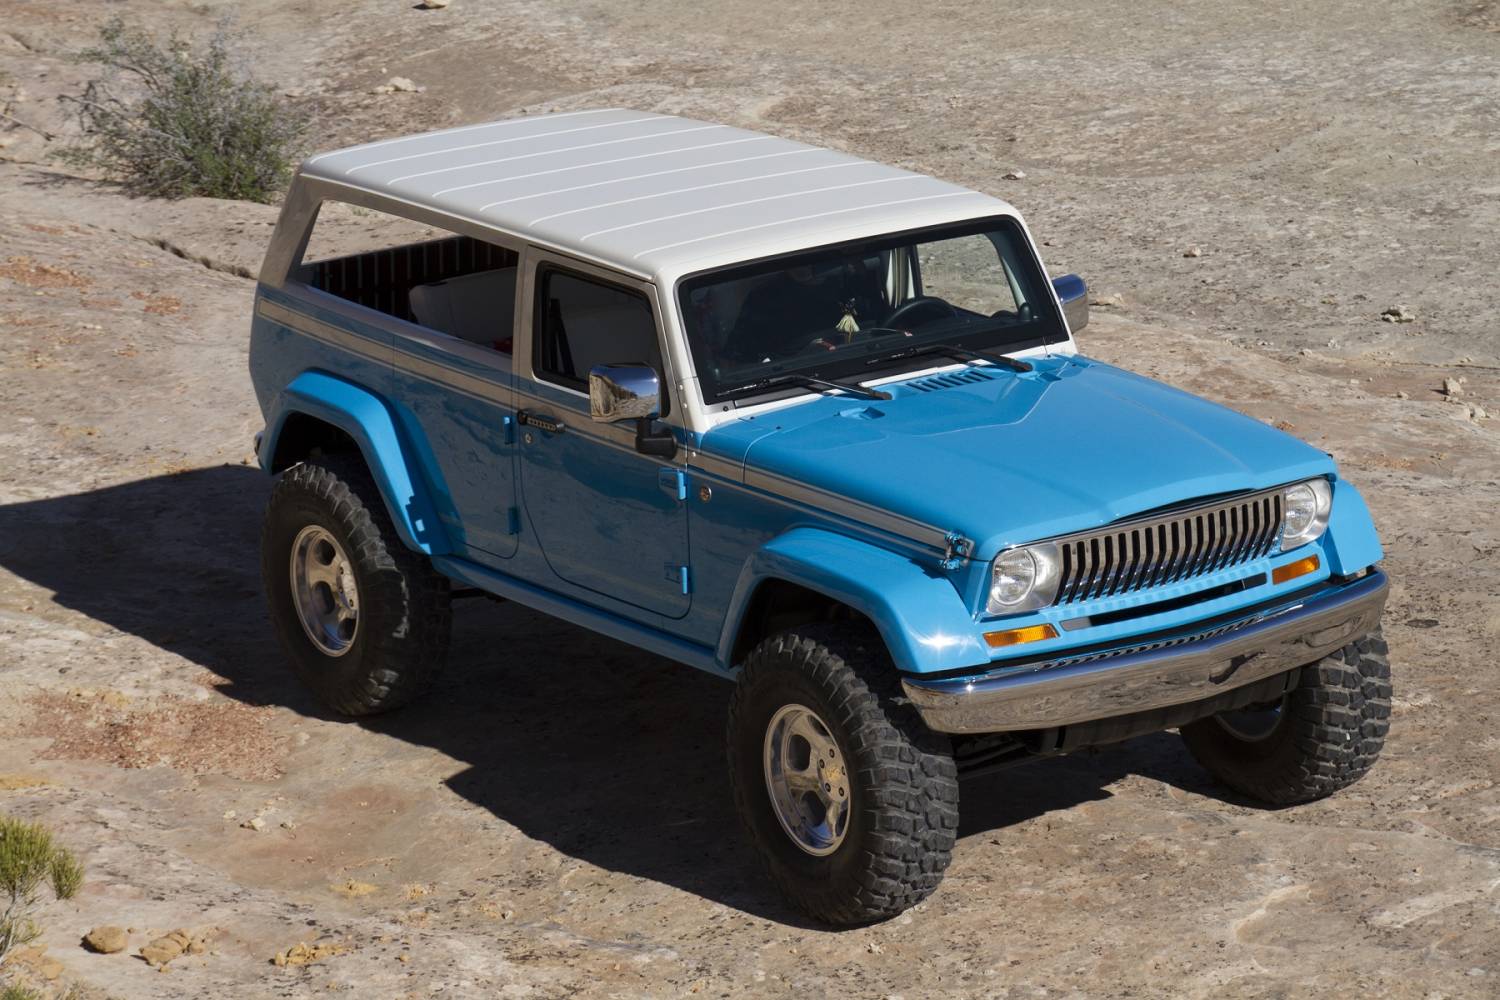 Jeep Wrangler Unlimited Is Still The Chief